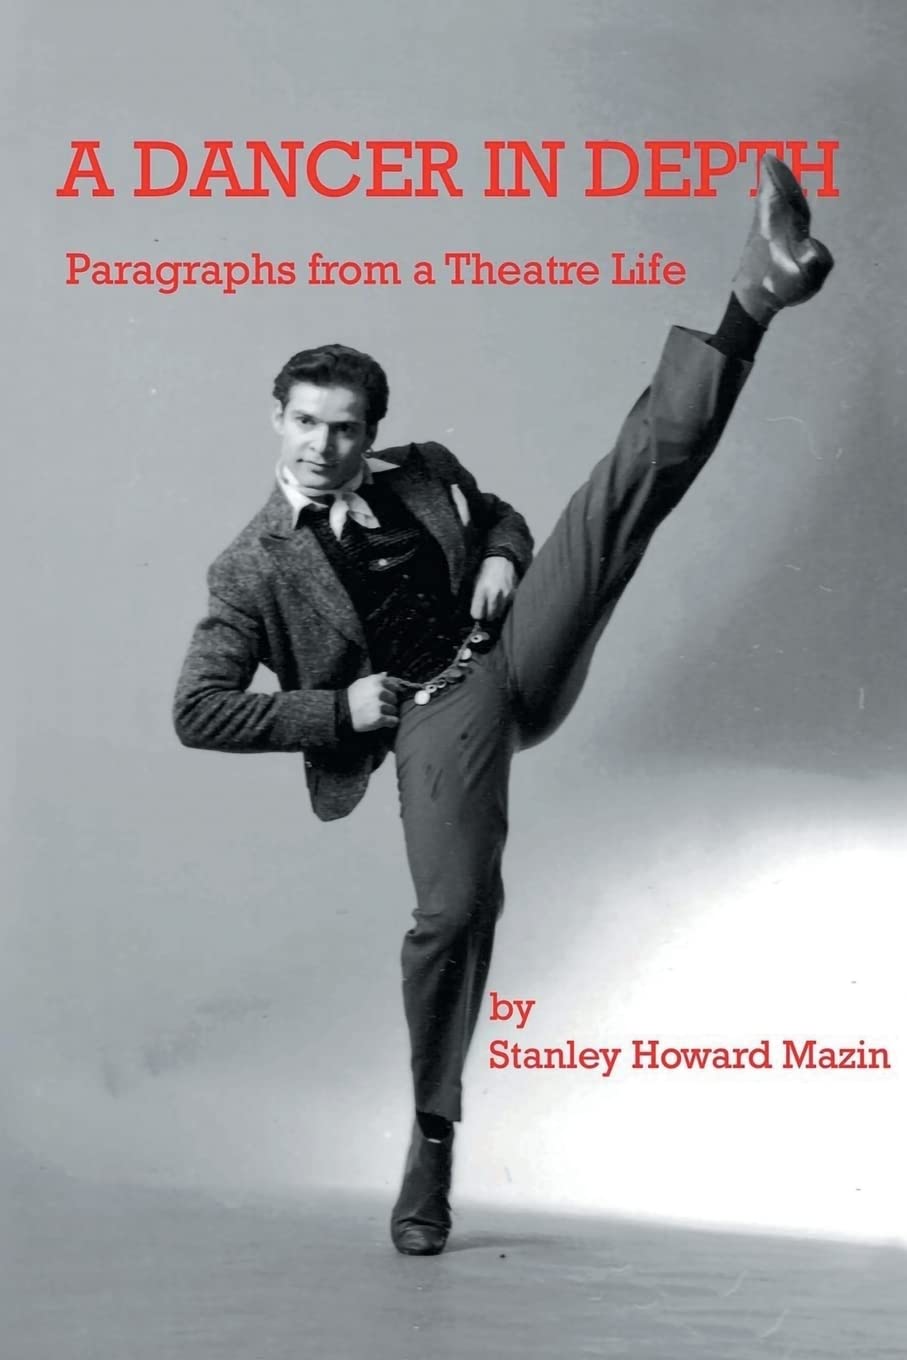 Author’s Tranquility Press Backs Stanley Howard Mazin as He Chronicles His Journey In A Dance in Depth